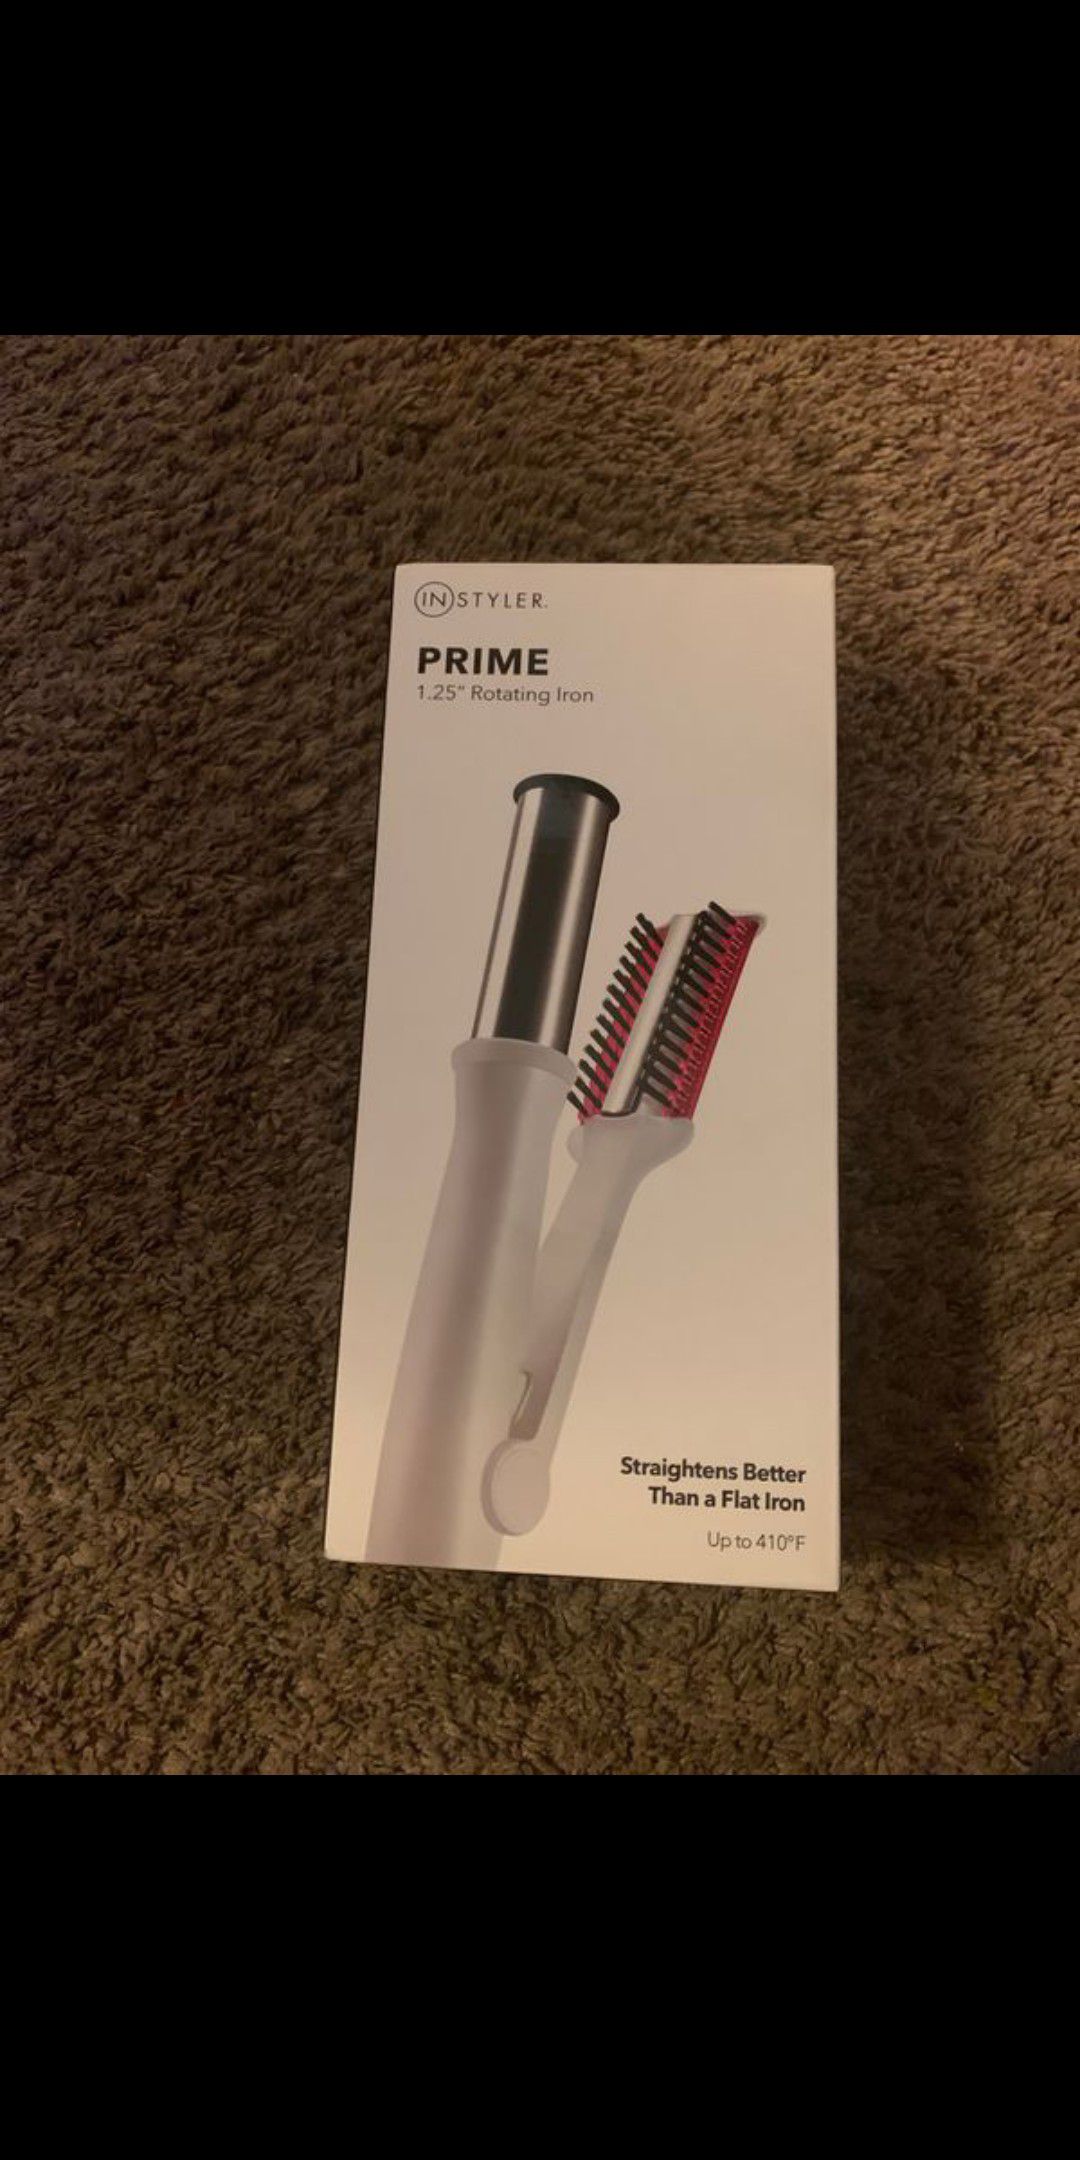 BRAND NEW INSTYLER PRIME 1.25 rotating iron